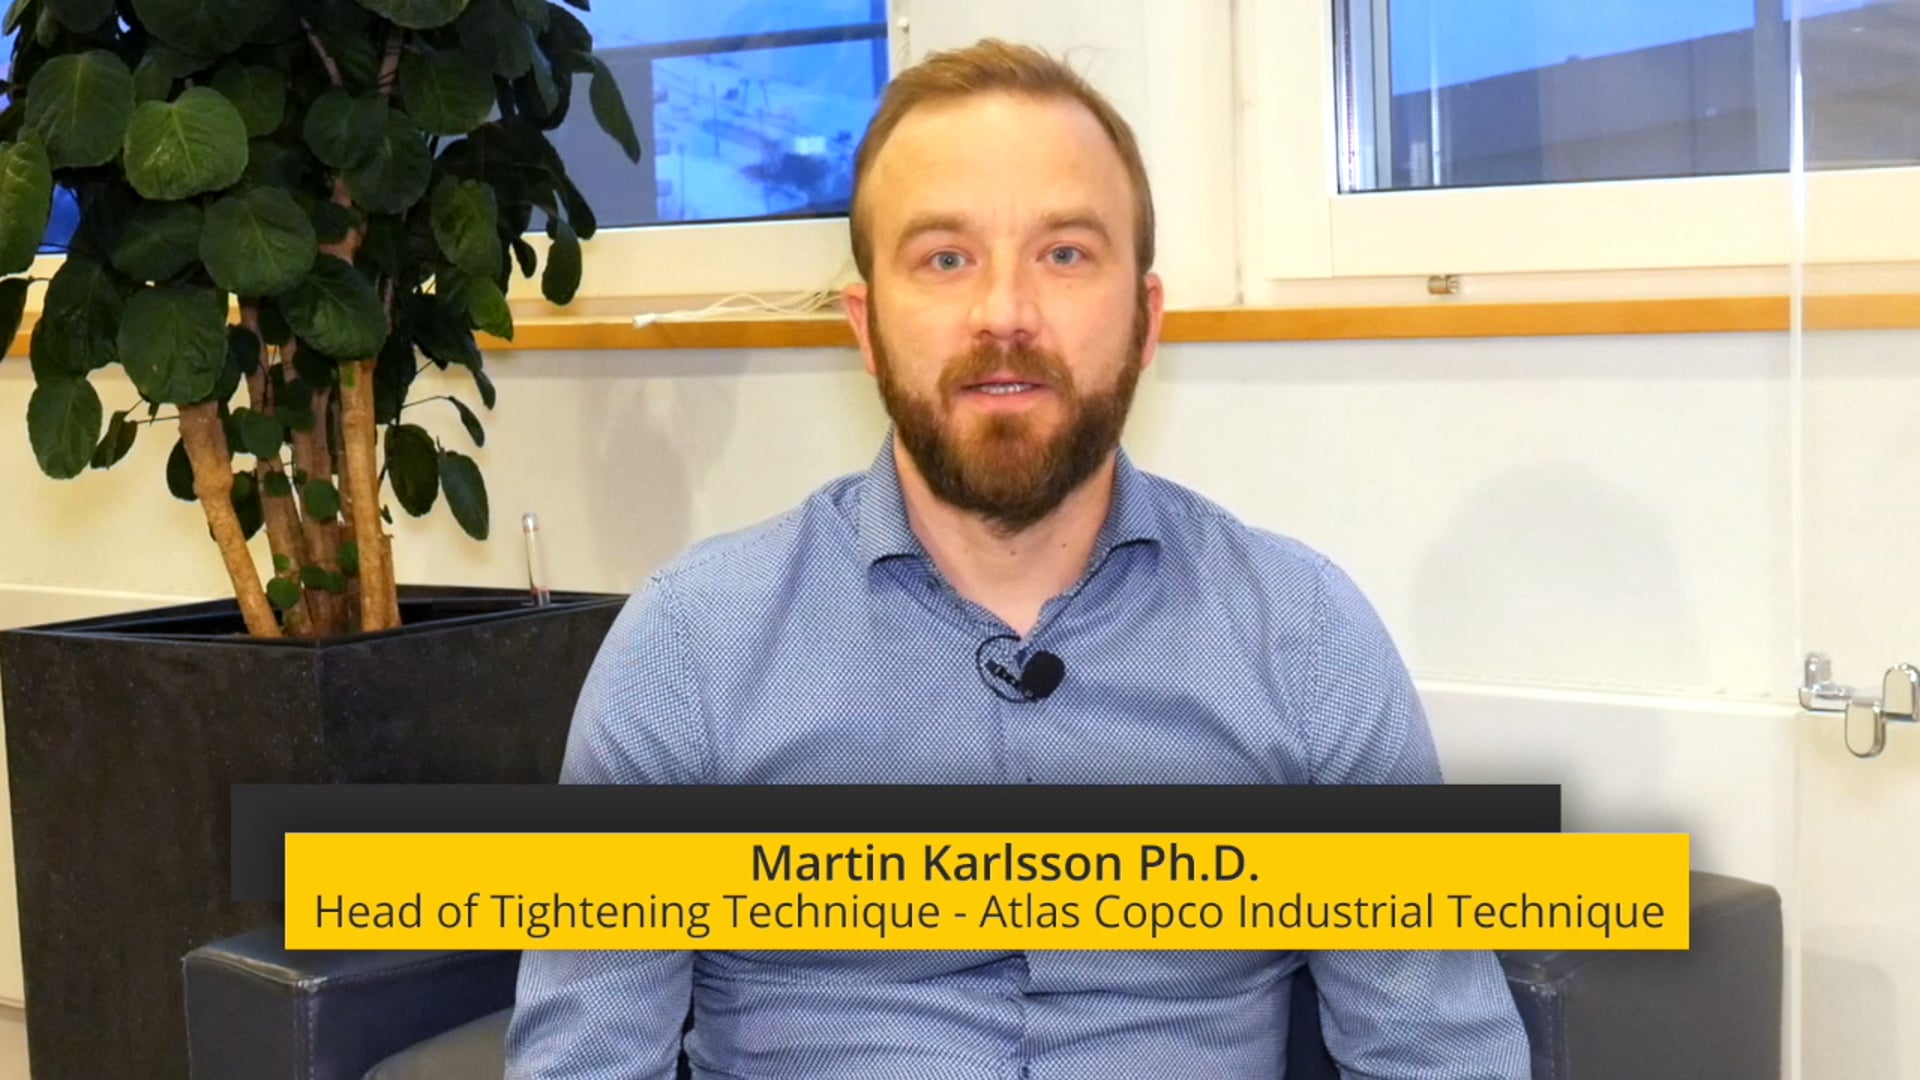 Communicating the Research with Martin Karlsson Ph.D.